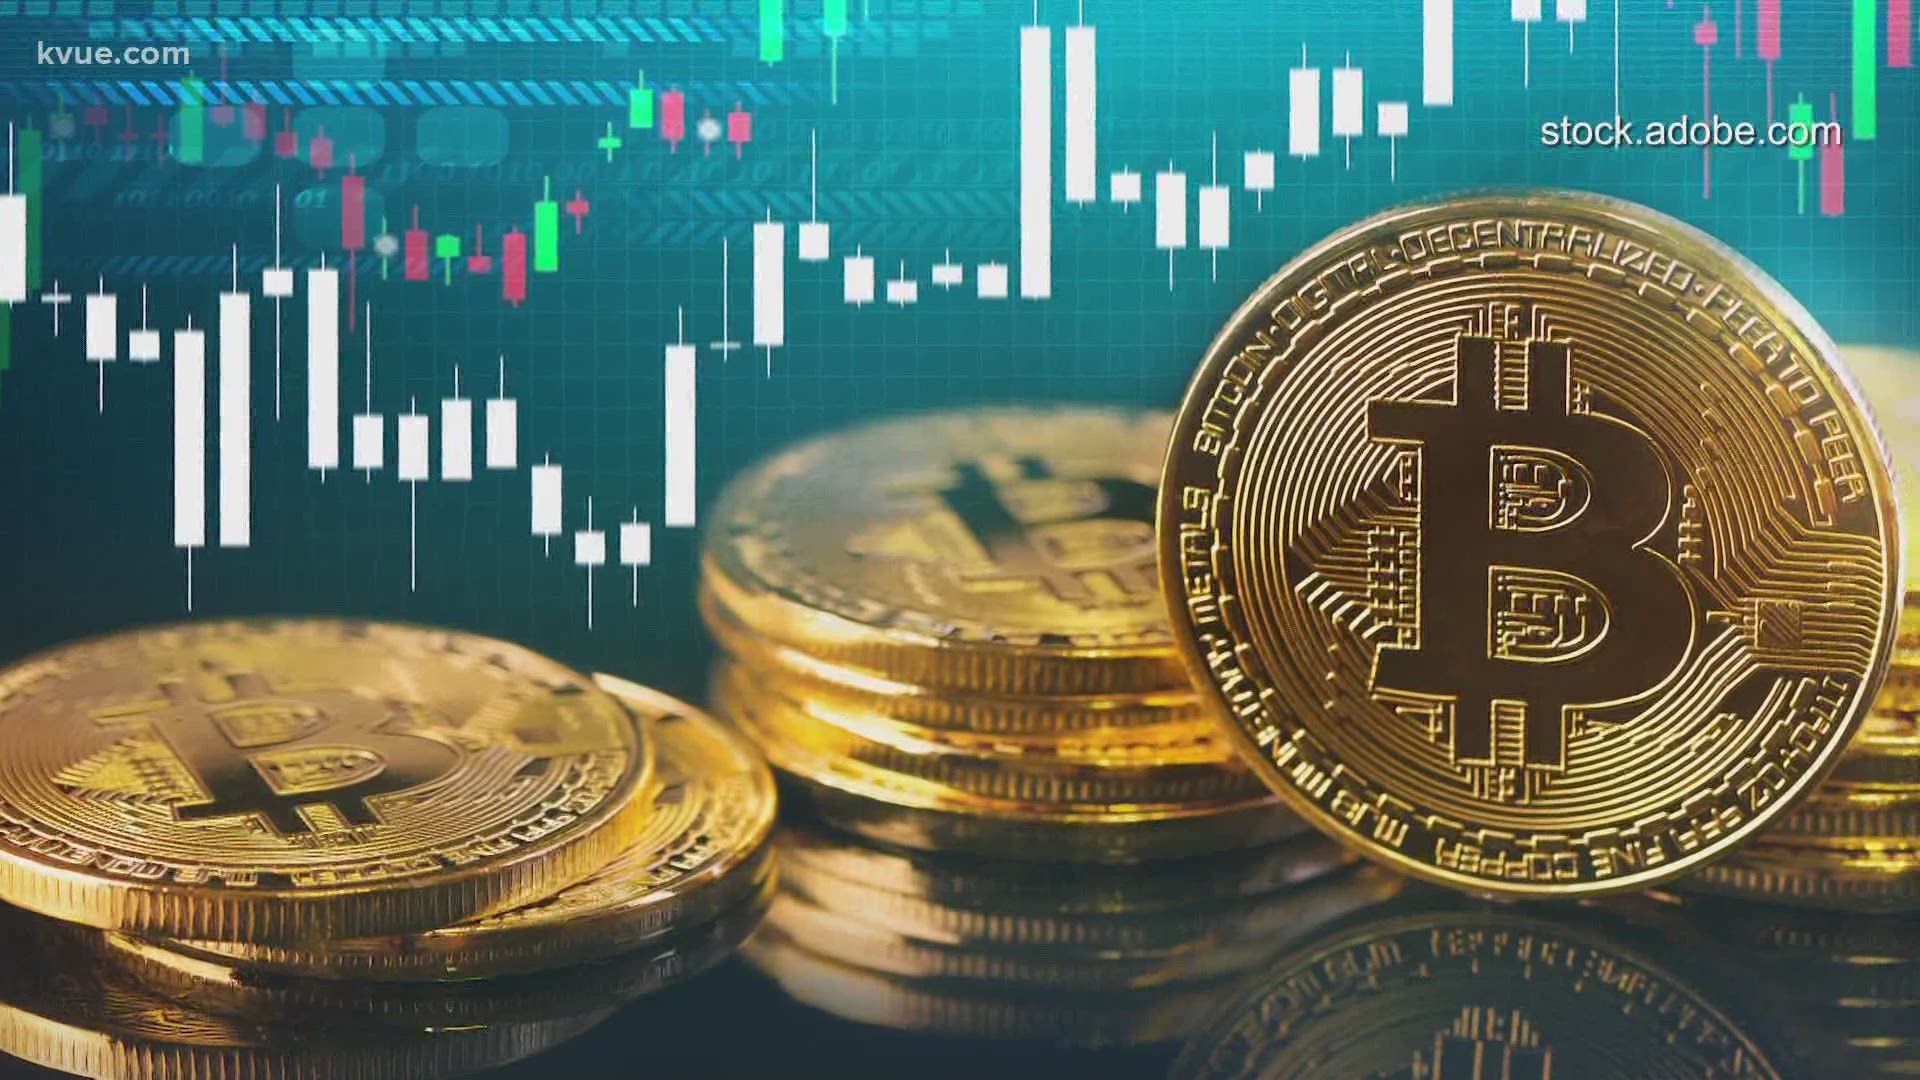 Vanessa McElwrath, a wealth management partner at ML&R Wealth Management joined KVUE Midday to simplify the complexities of the cryptocurrency mania.